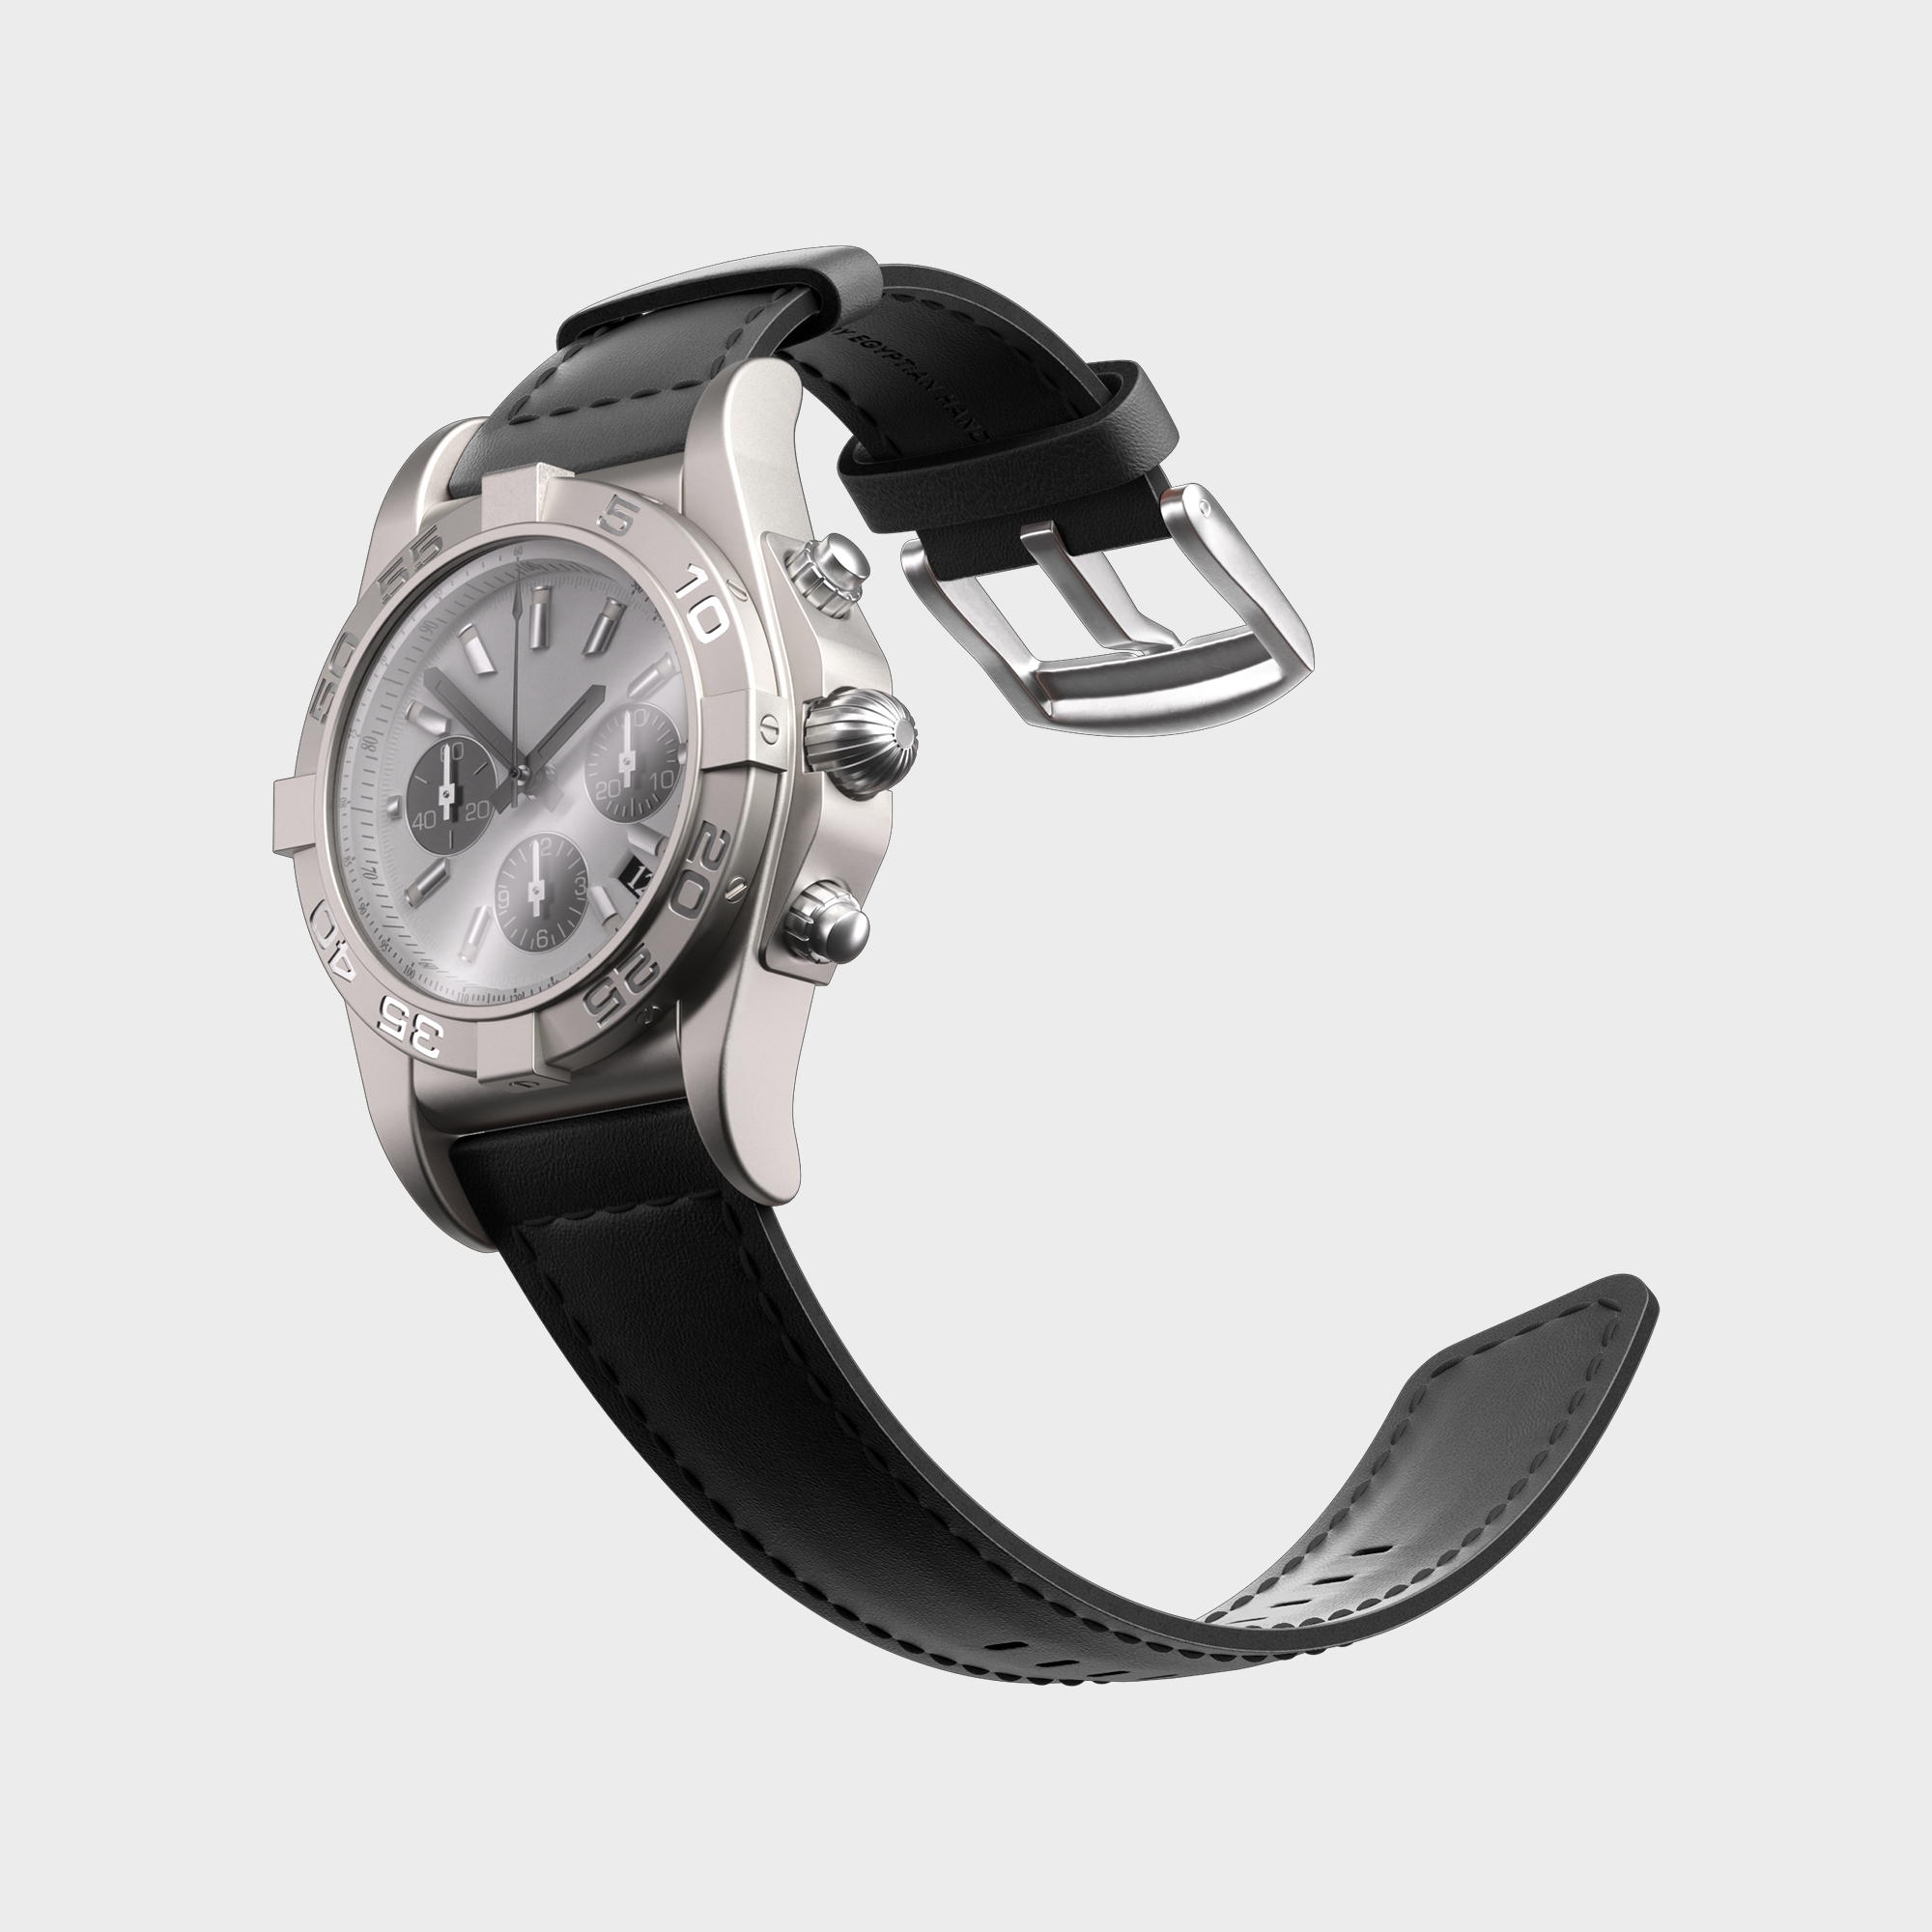 GoWrist™ - Your On-The-Go Digital Business Card - Compatible with Traditional Watches - Black